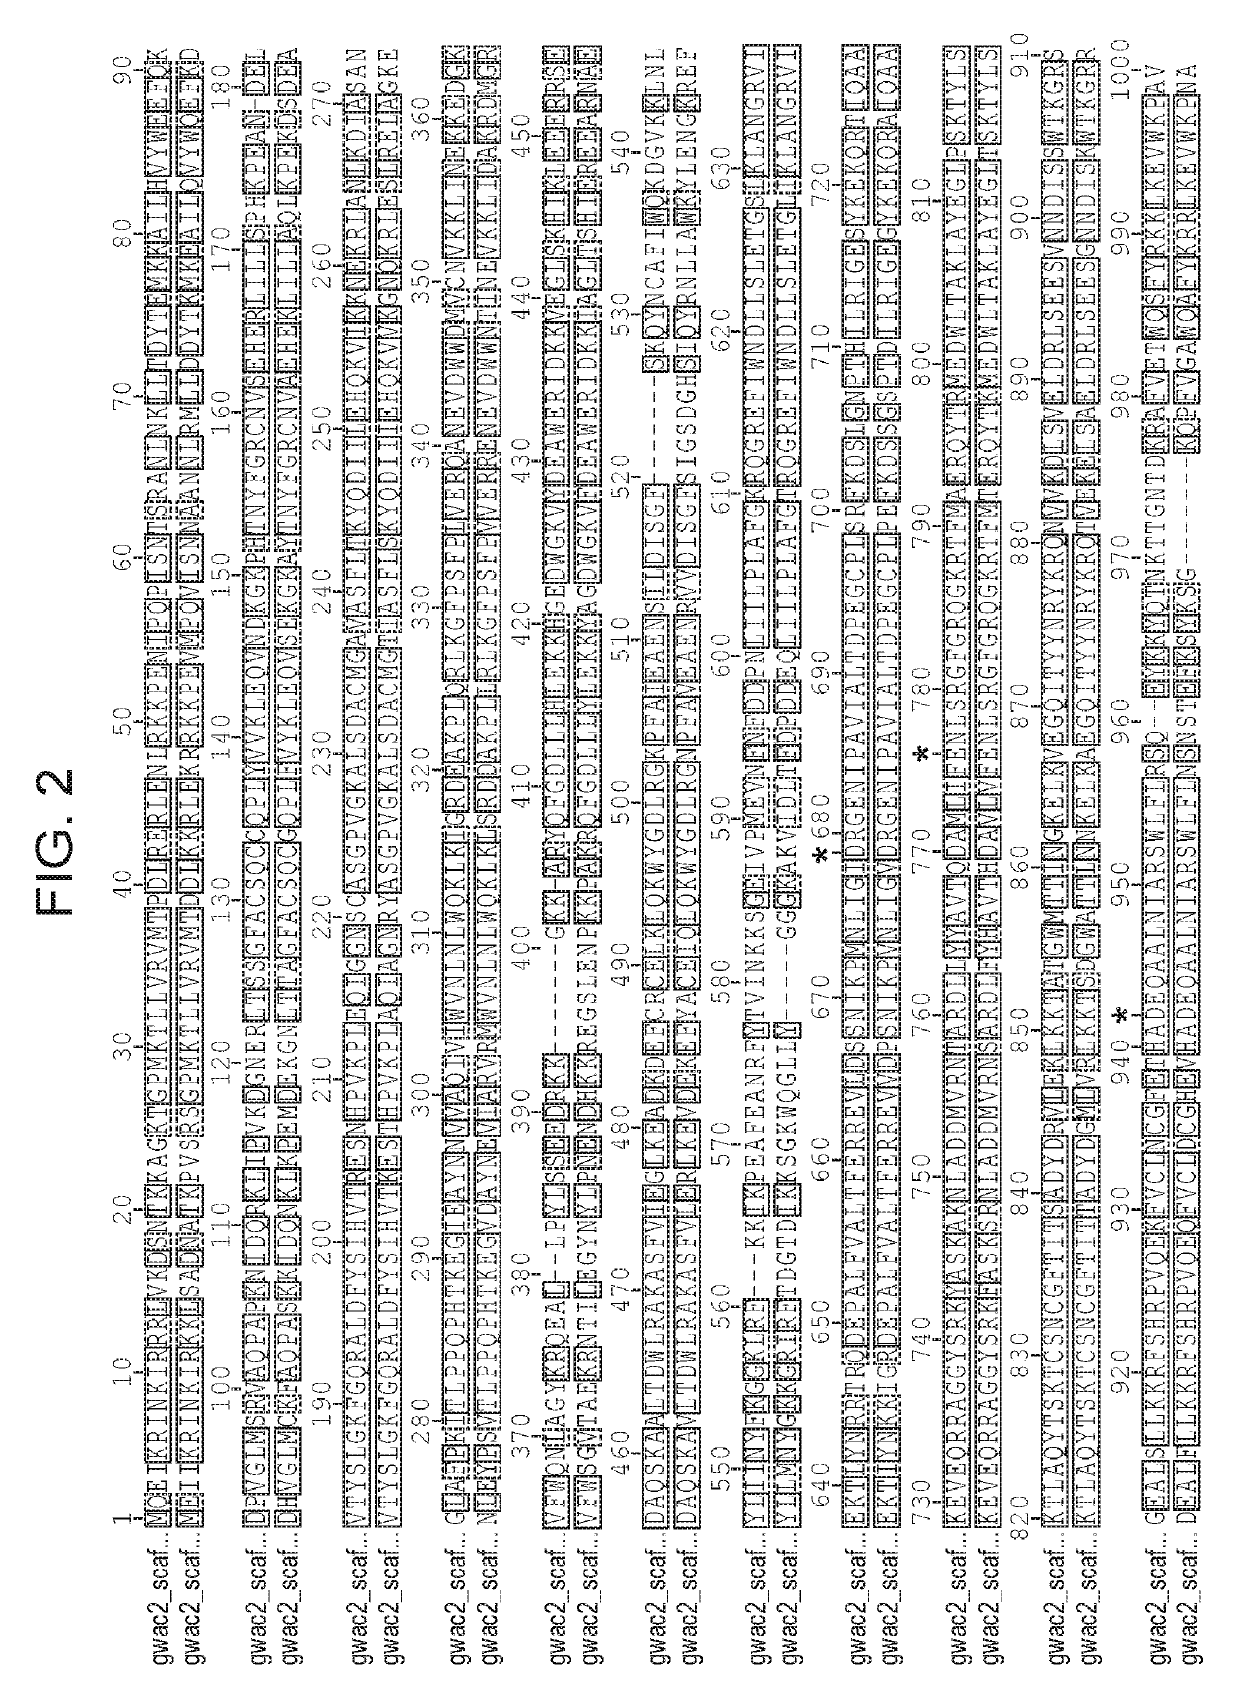 Rna-guided nucleic acid modifying enzymes and methods of use thereof